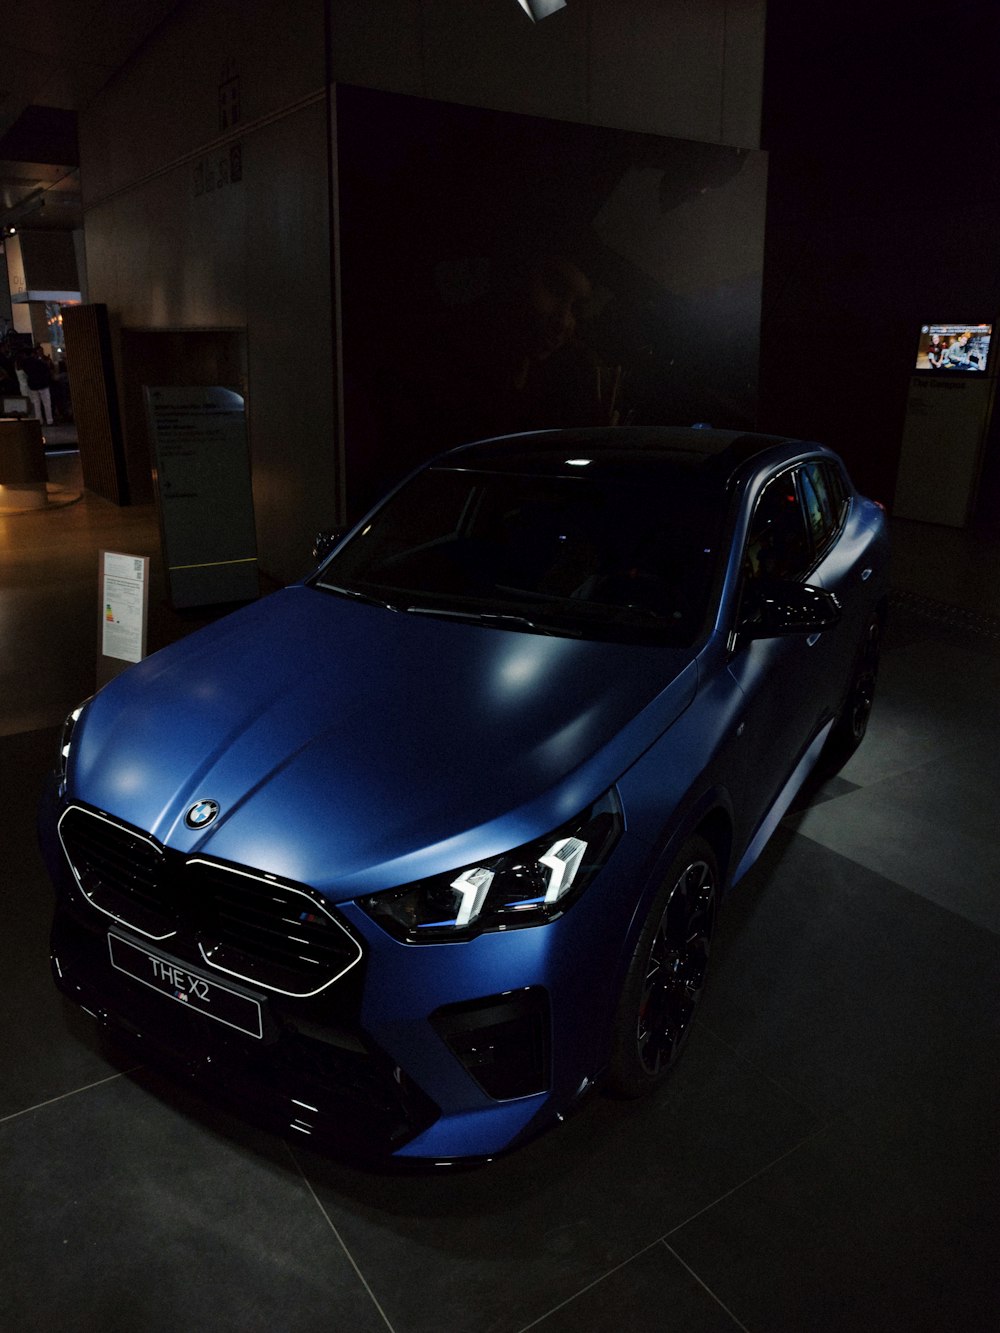 a blue car parked in a dark room